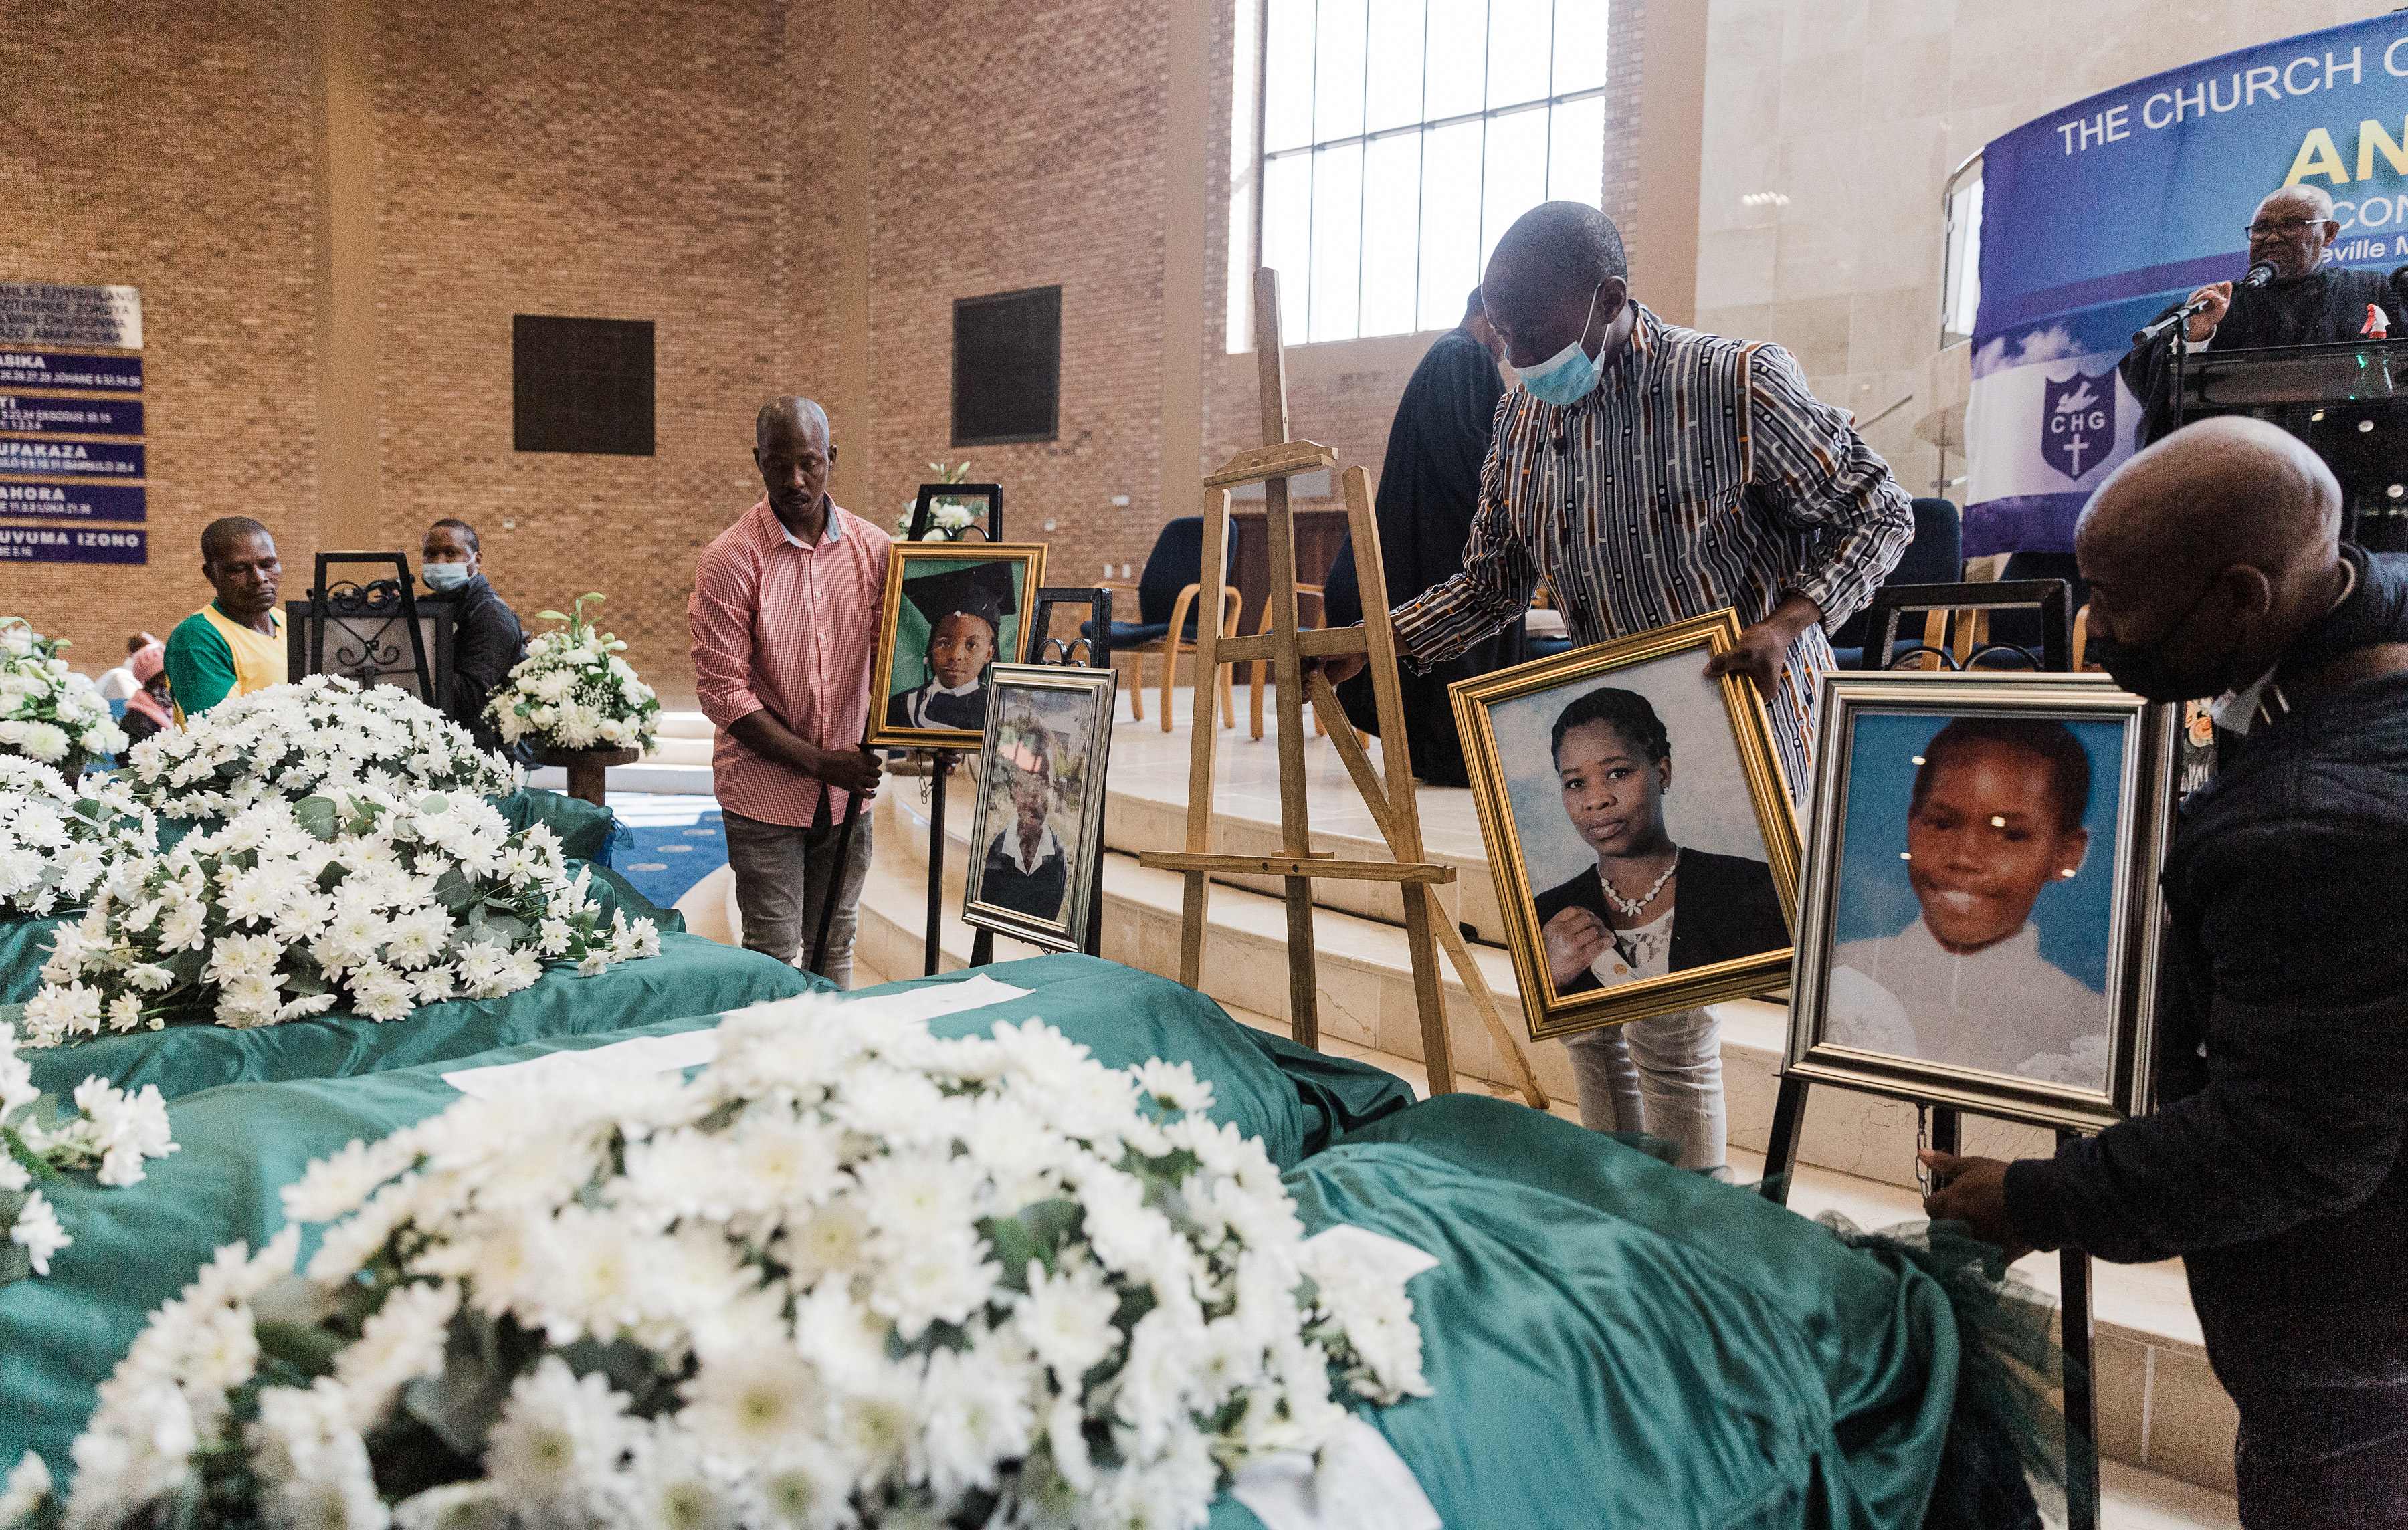 Photos are placed at the funeral service for the Jileka family, a single family who drowned when their home was engulfed in water following devastating floods in Kwa-Zulu Natal province